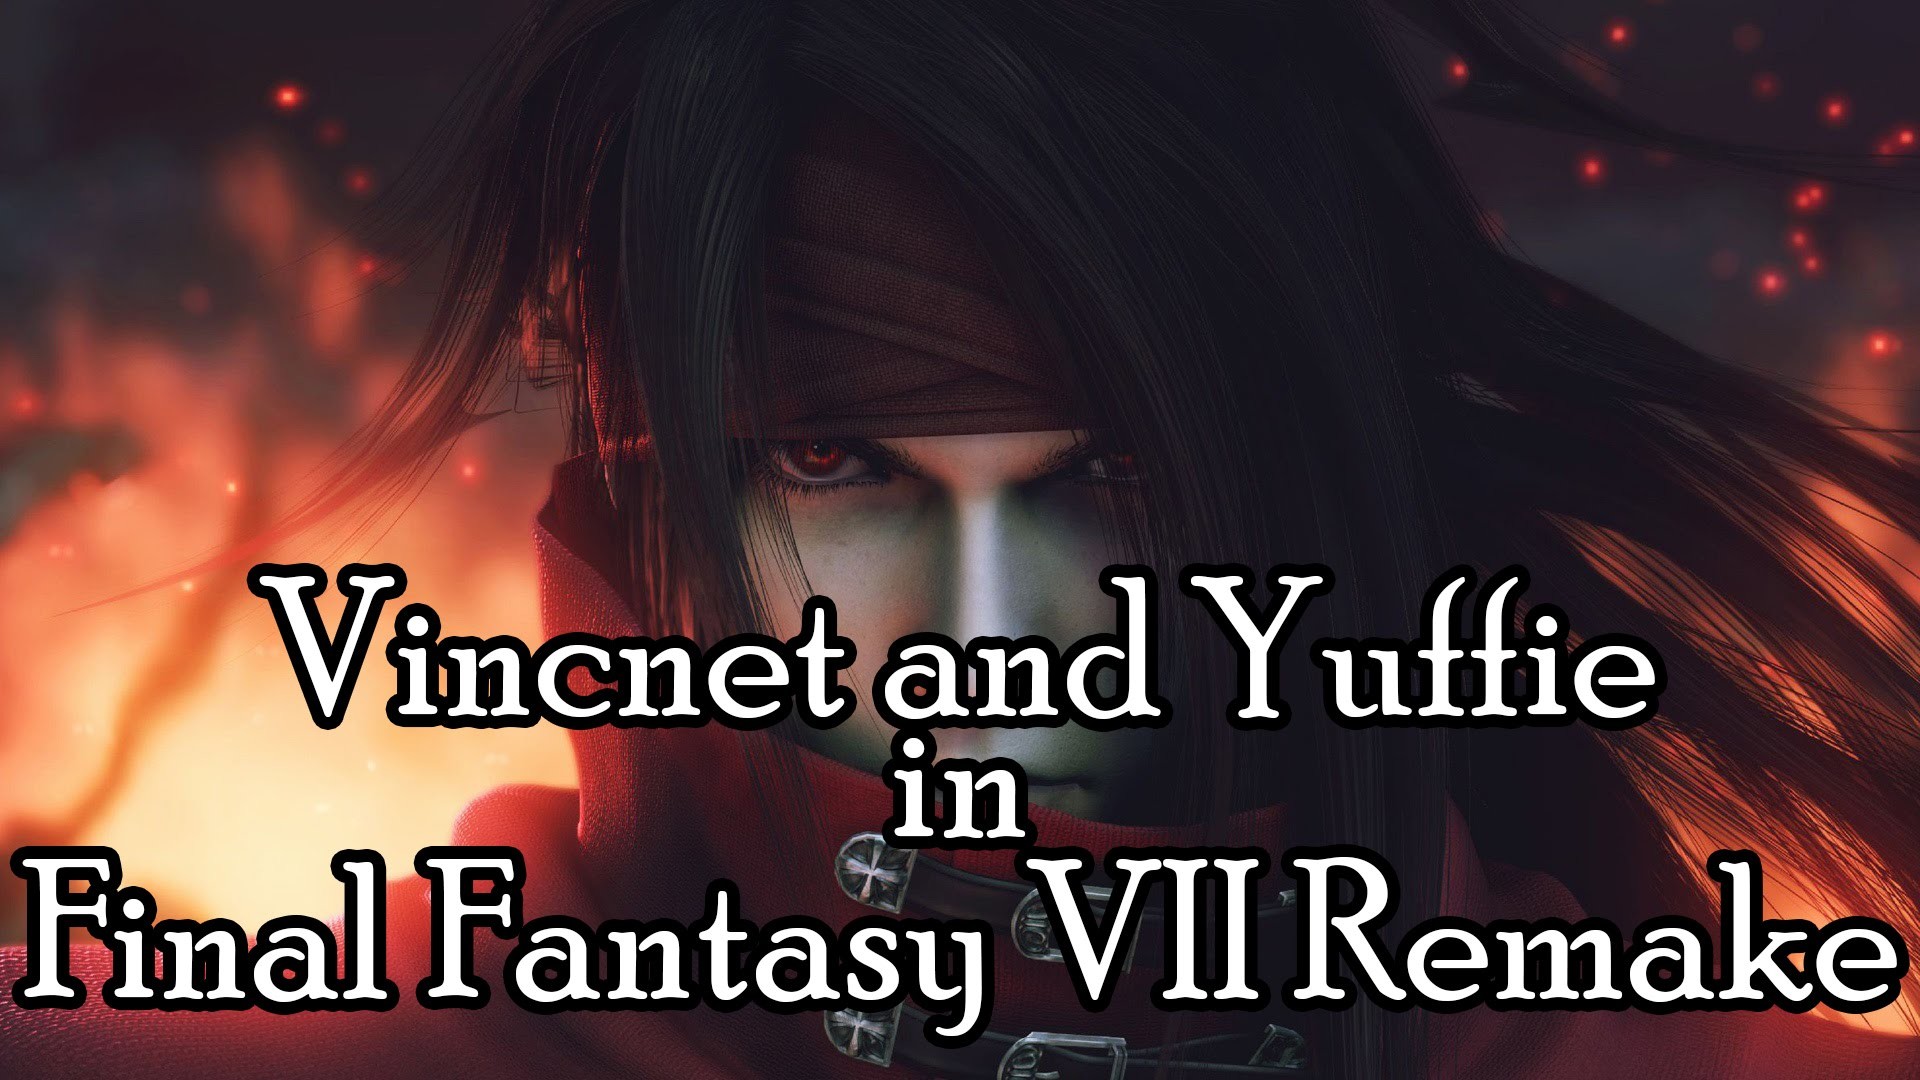 1920x1080 Final Fantasy VII Remake: Vincent and Yuffie (Will They Be Optional?)